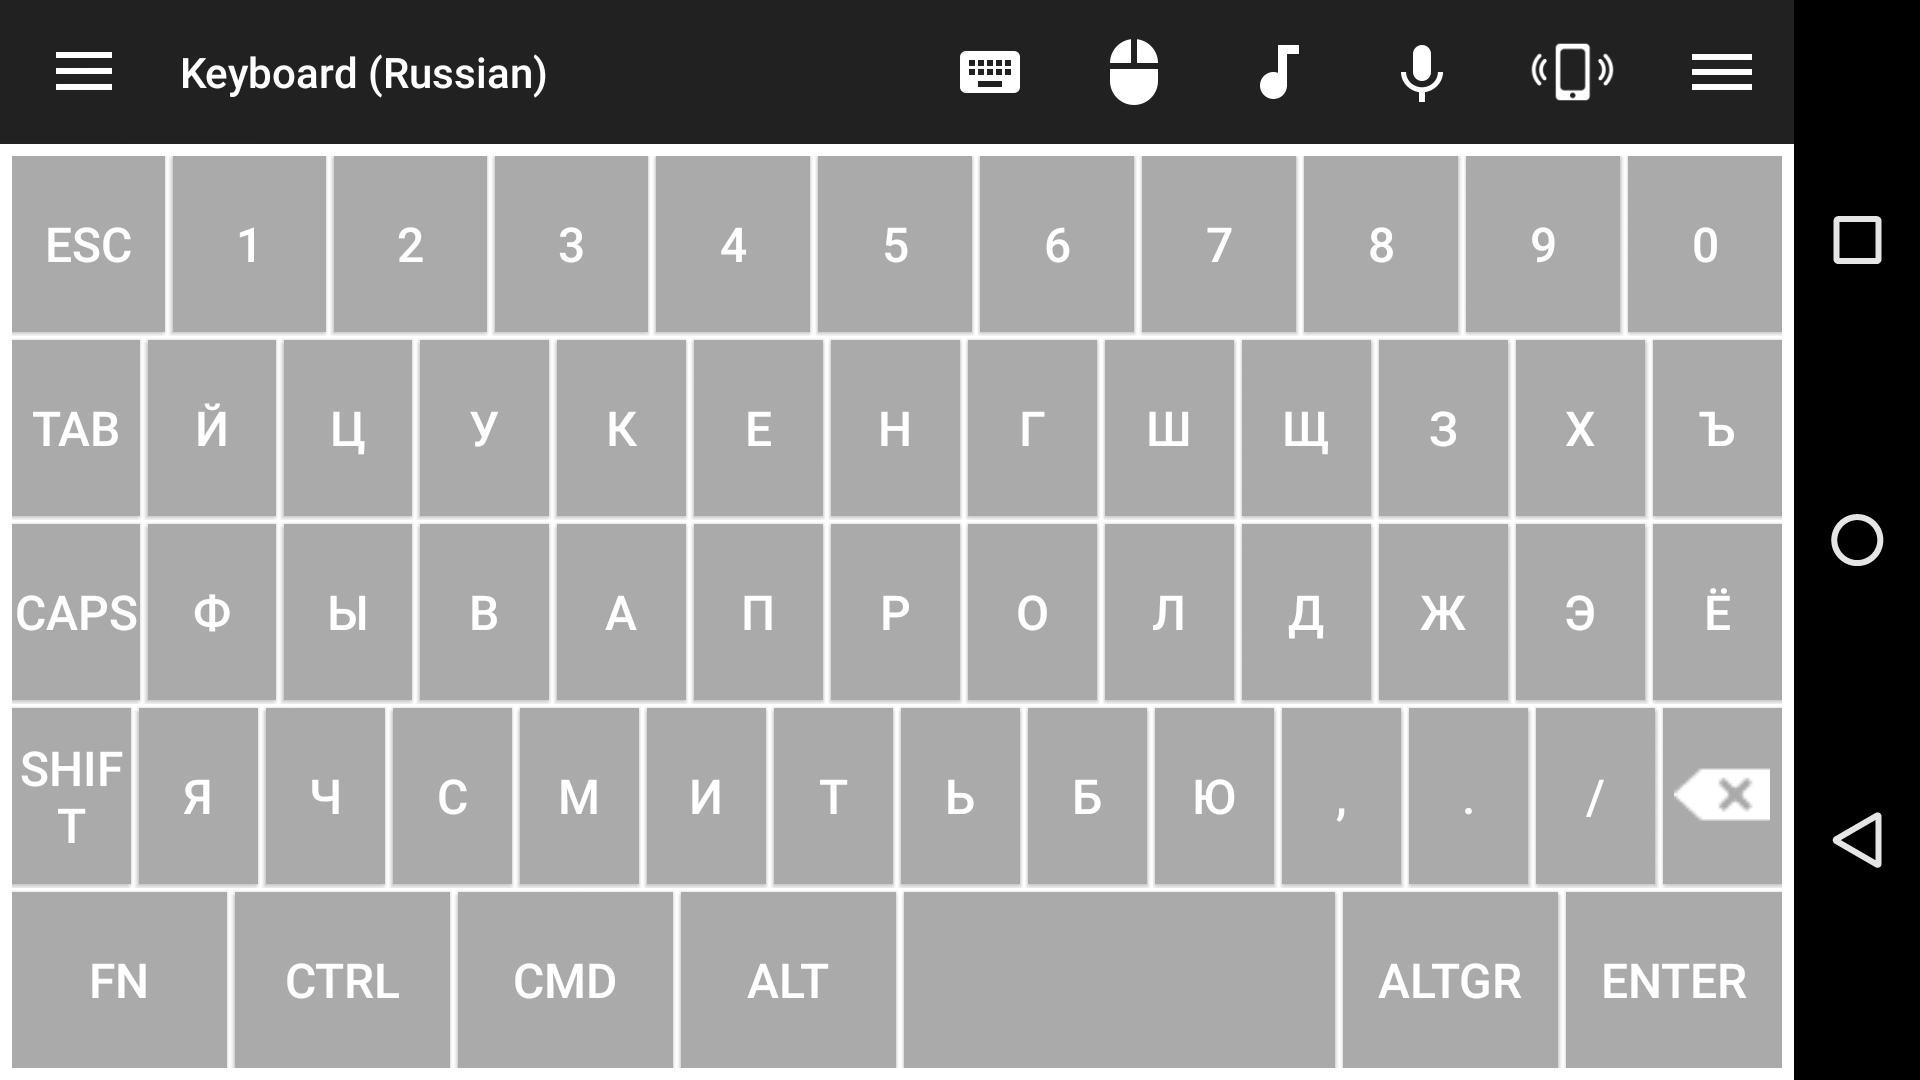 Keyboard (Russian) Remote – Unified Remote